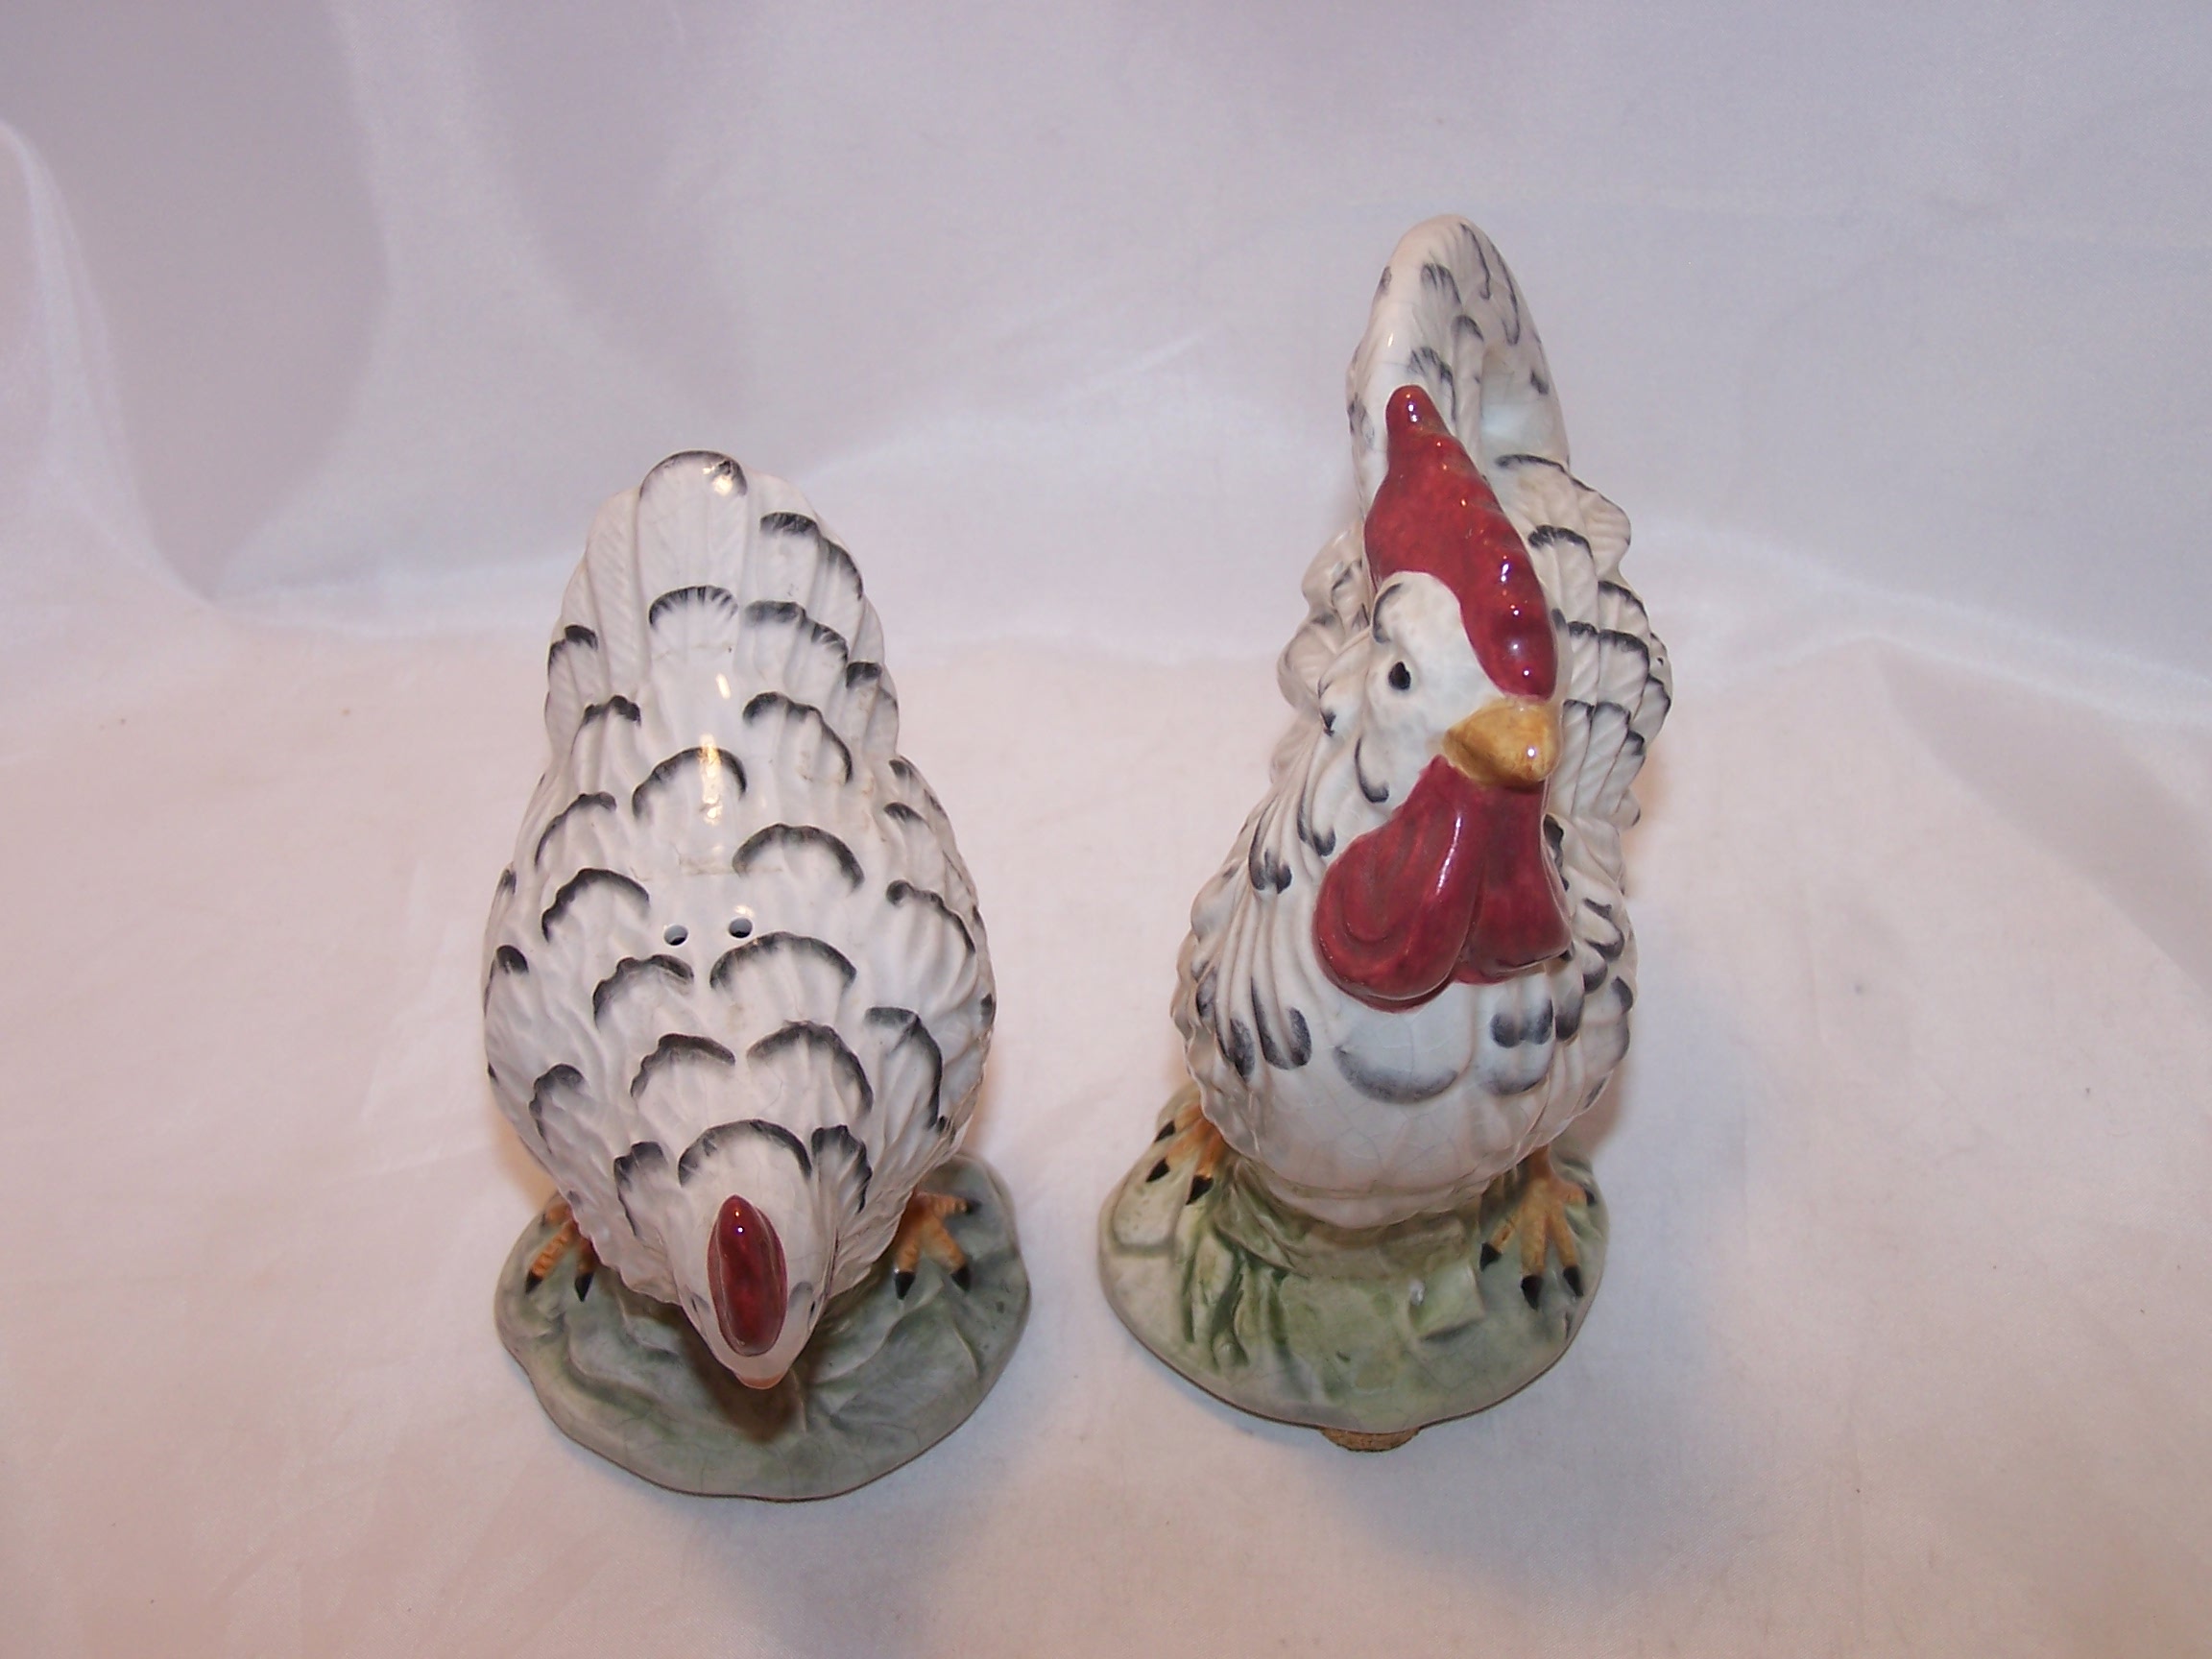 Chicken, Rooster Salt and Pepper Shakers, Large